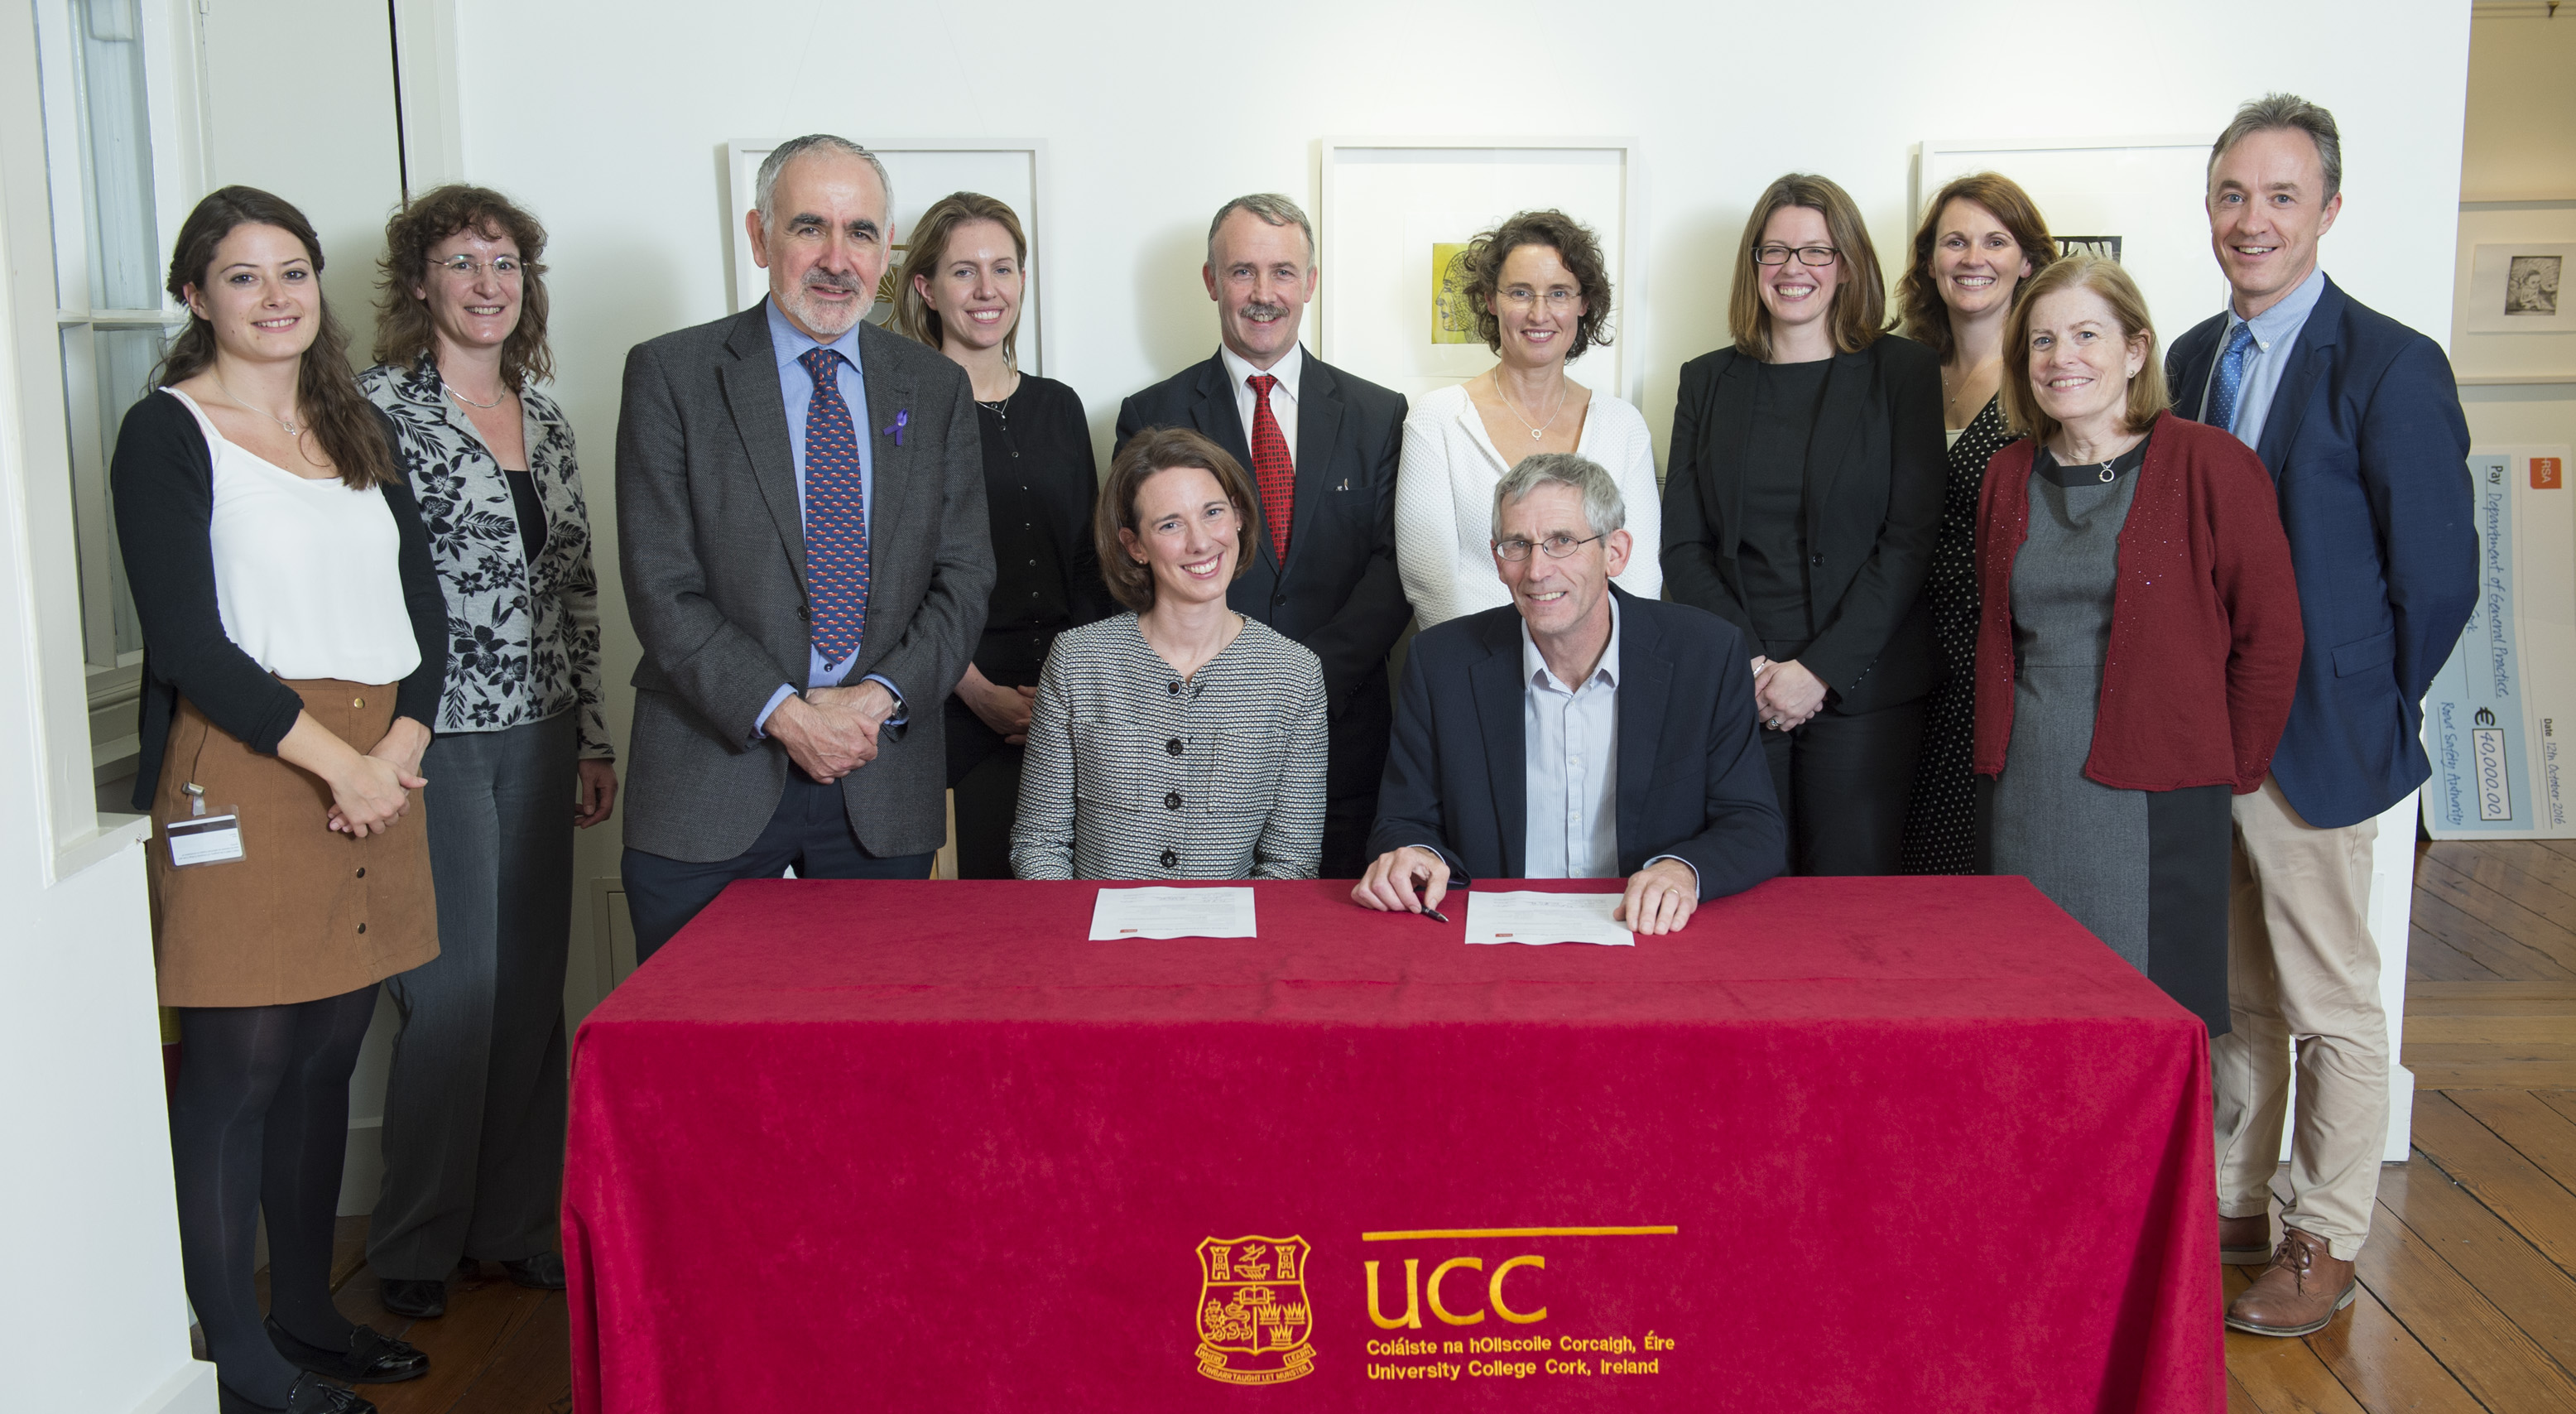 First research grant in Traffic Medicine awarded to UCC research team